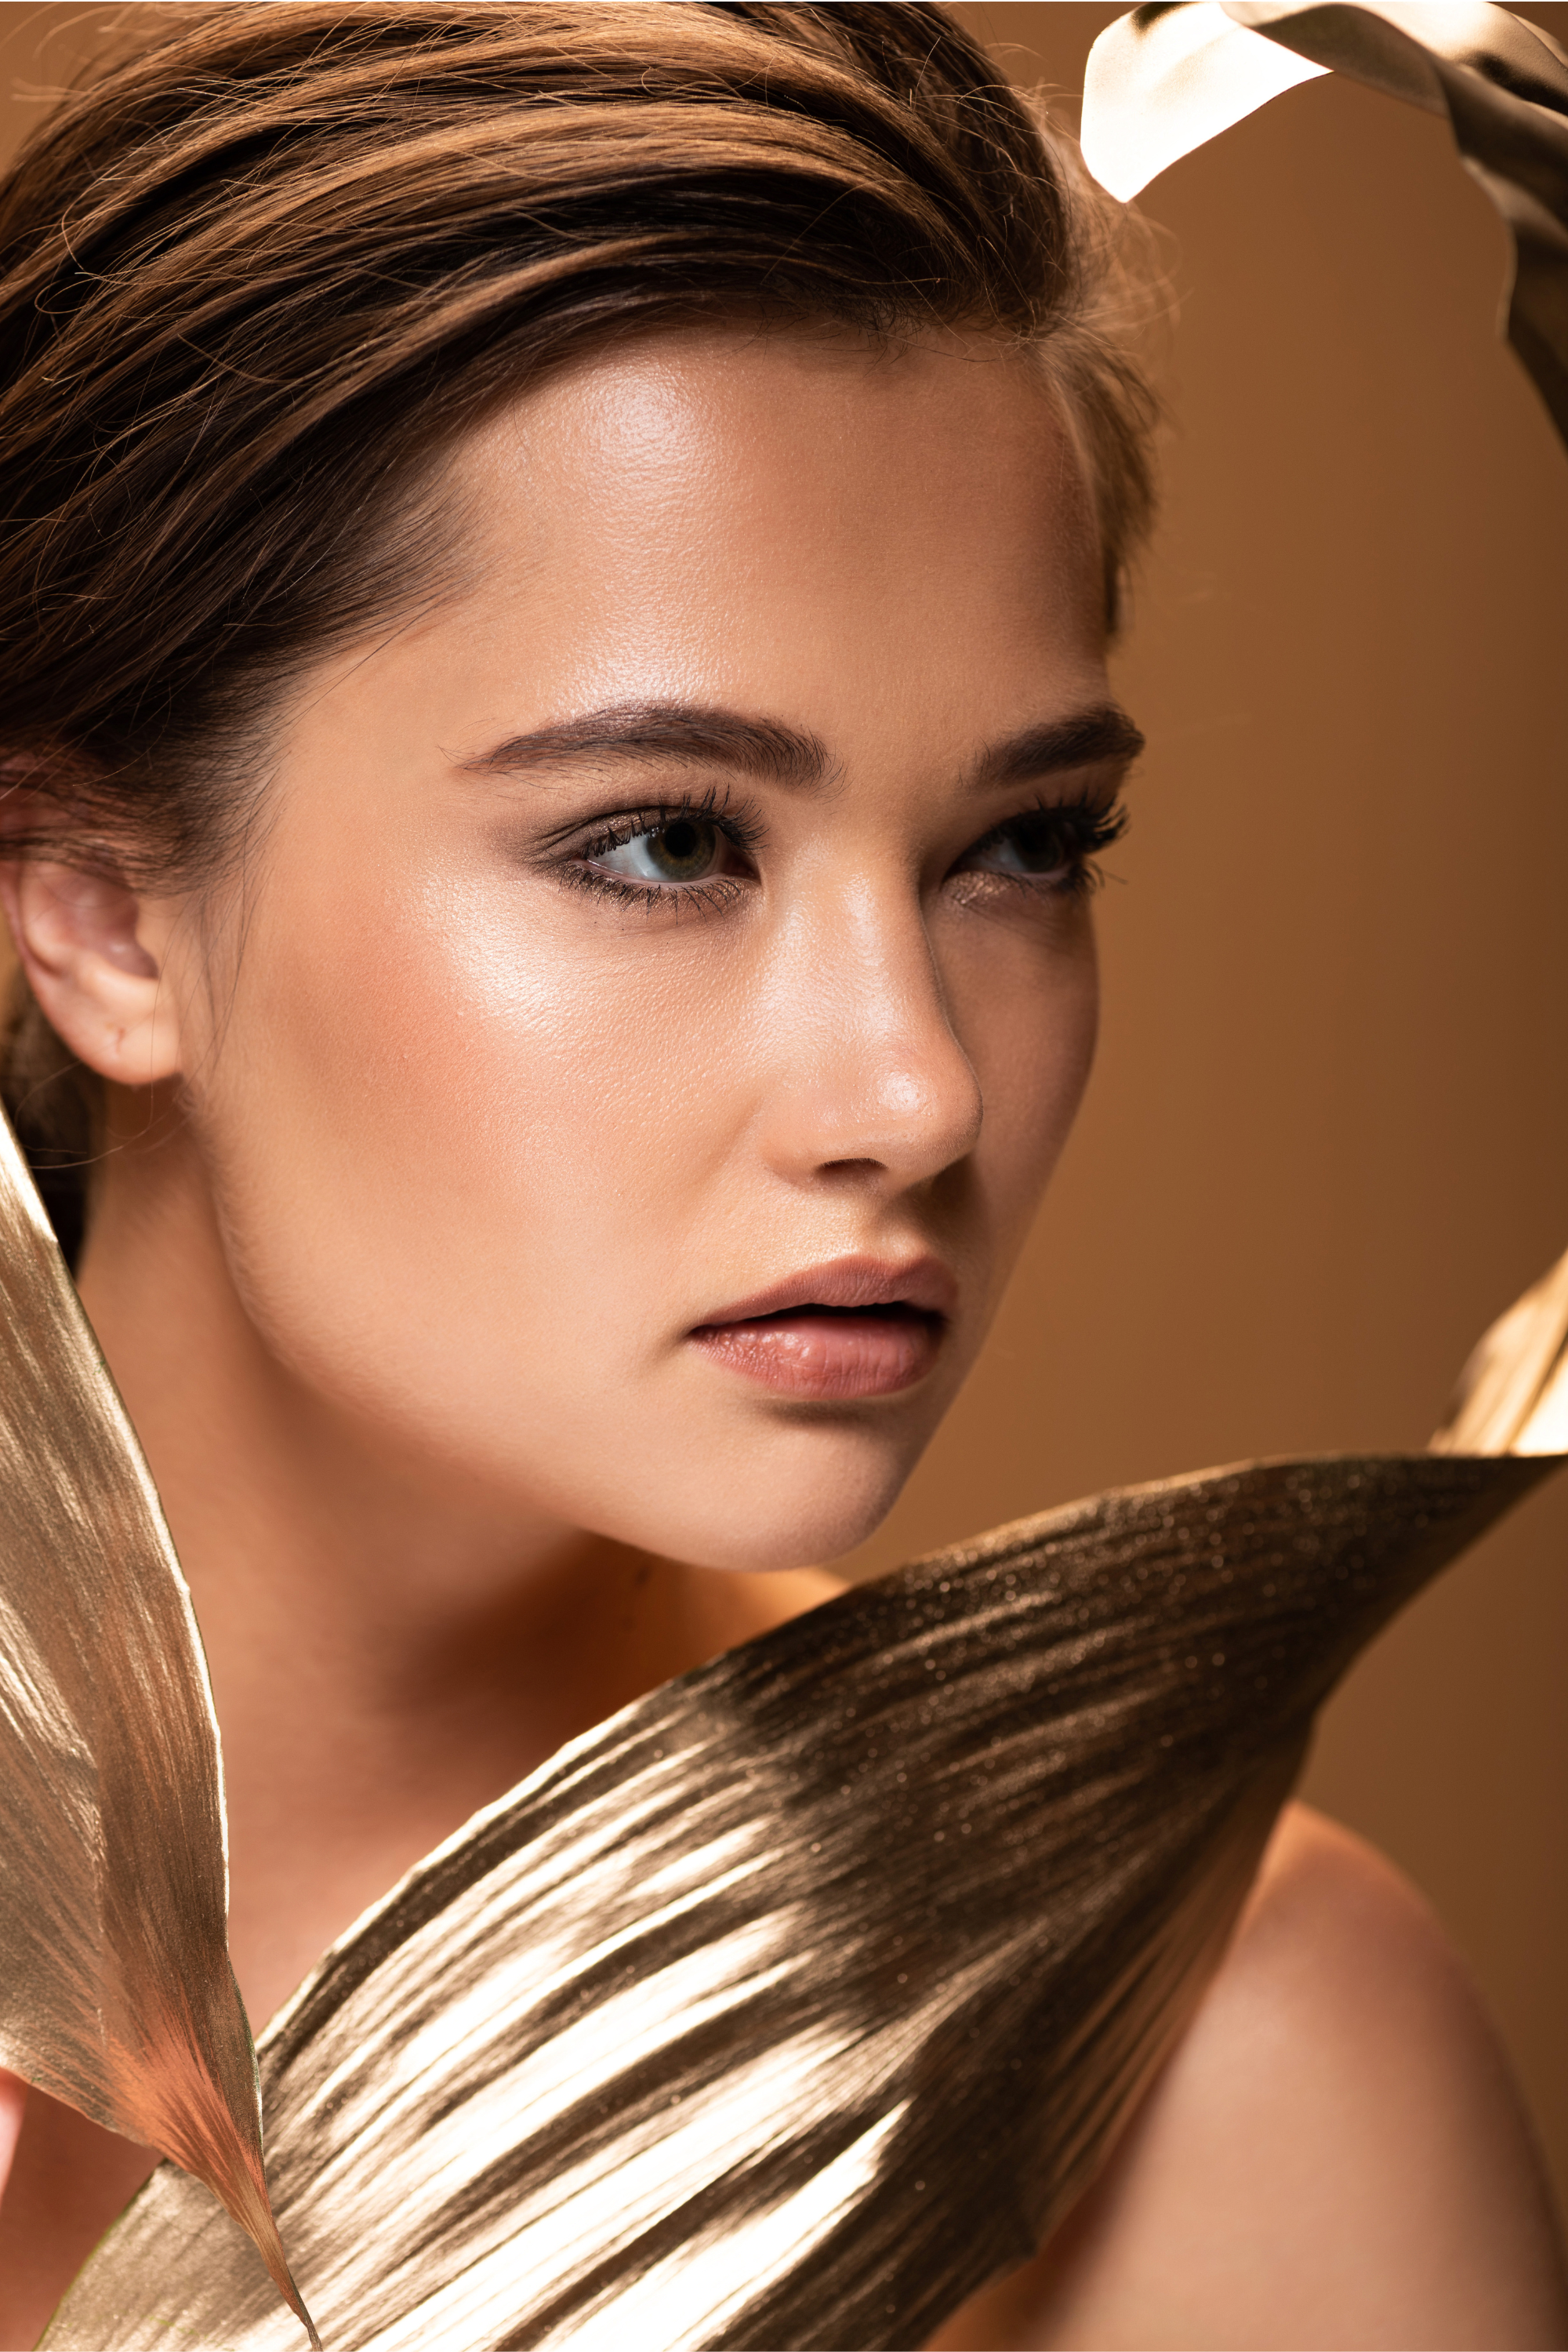 Bronzer vs. Blush: Which Gives You the Perfect Glow?